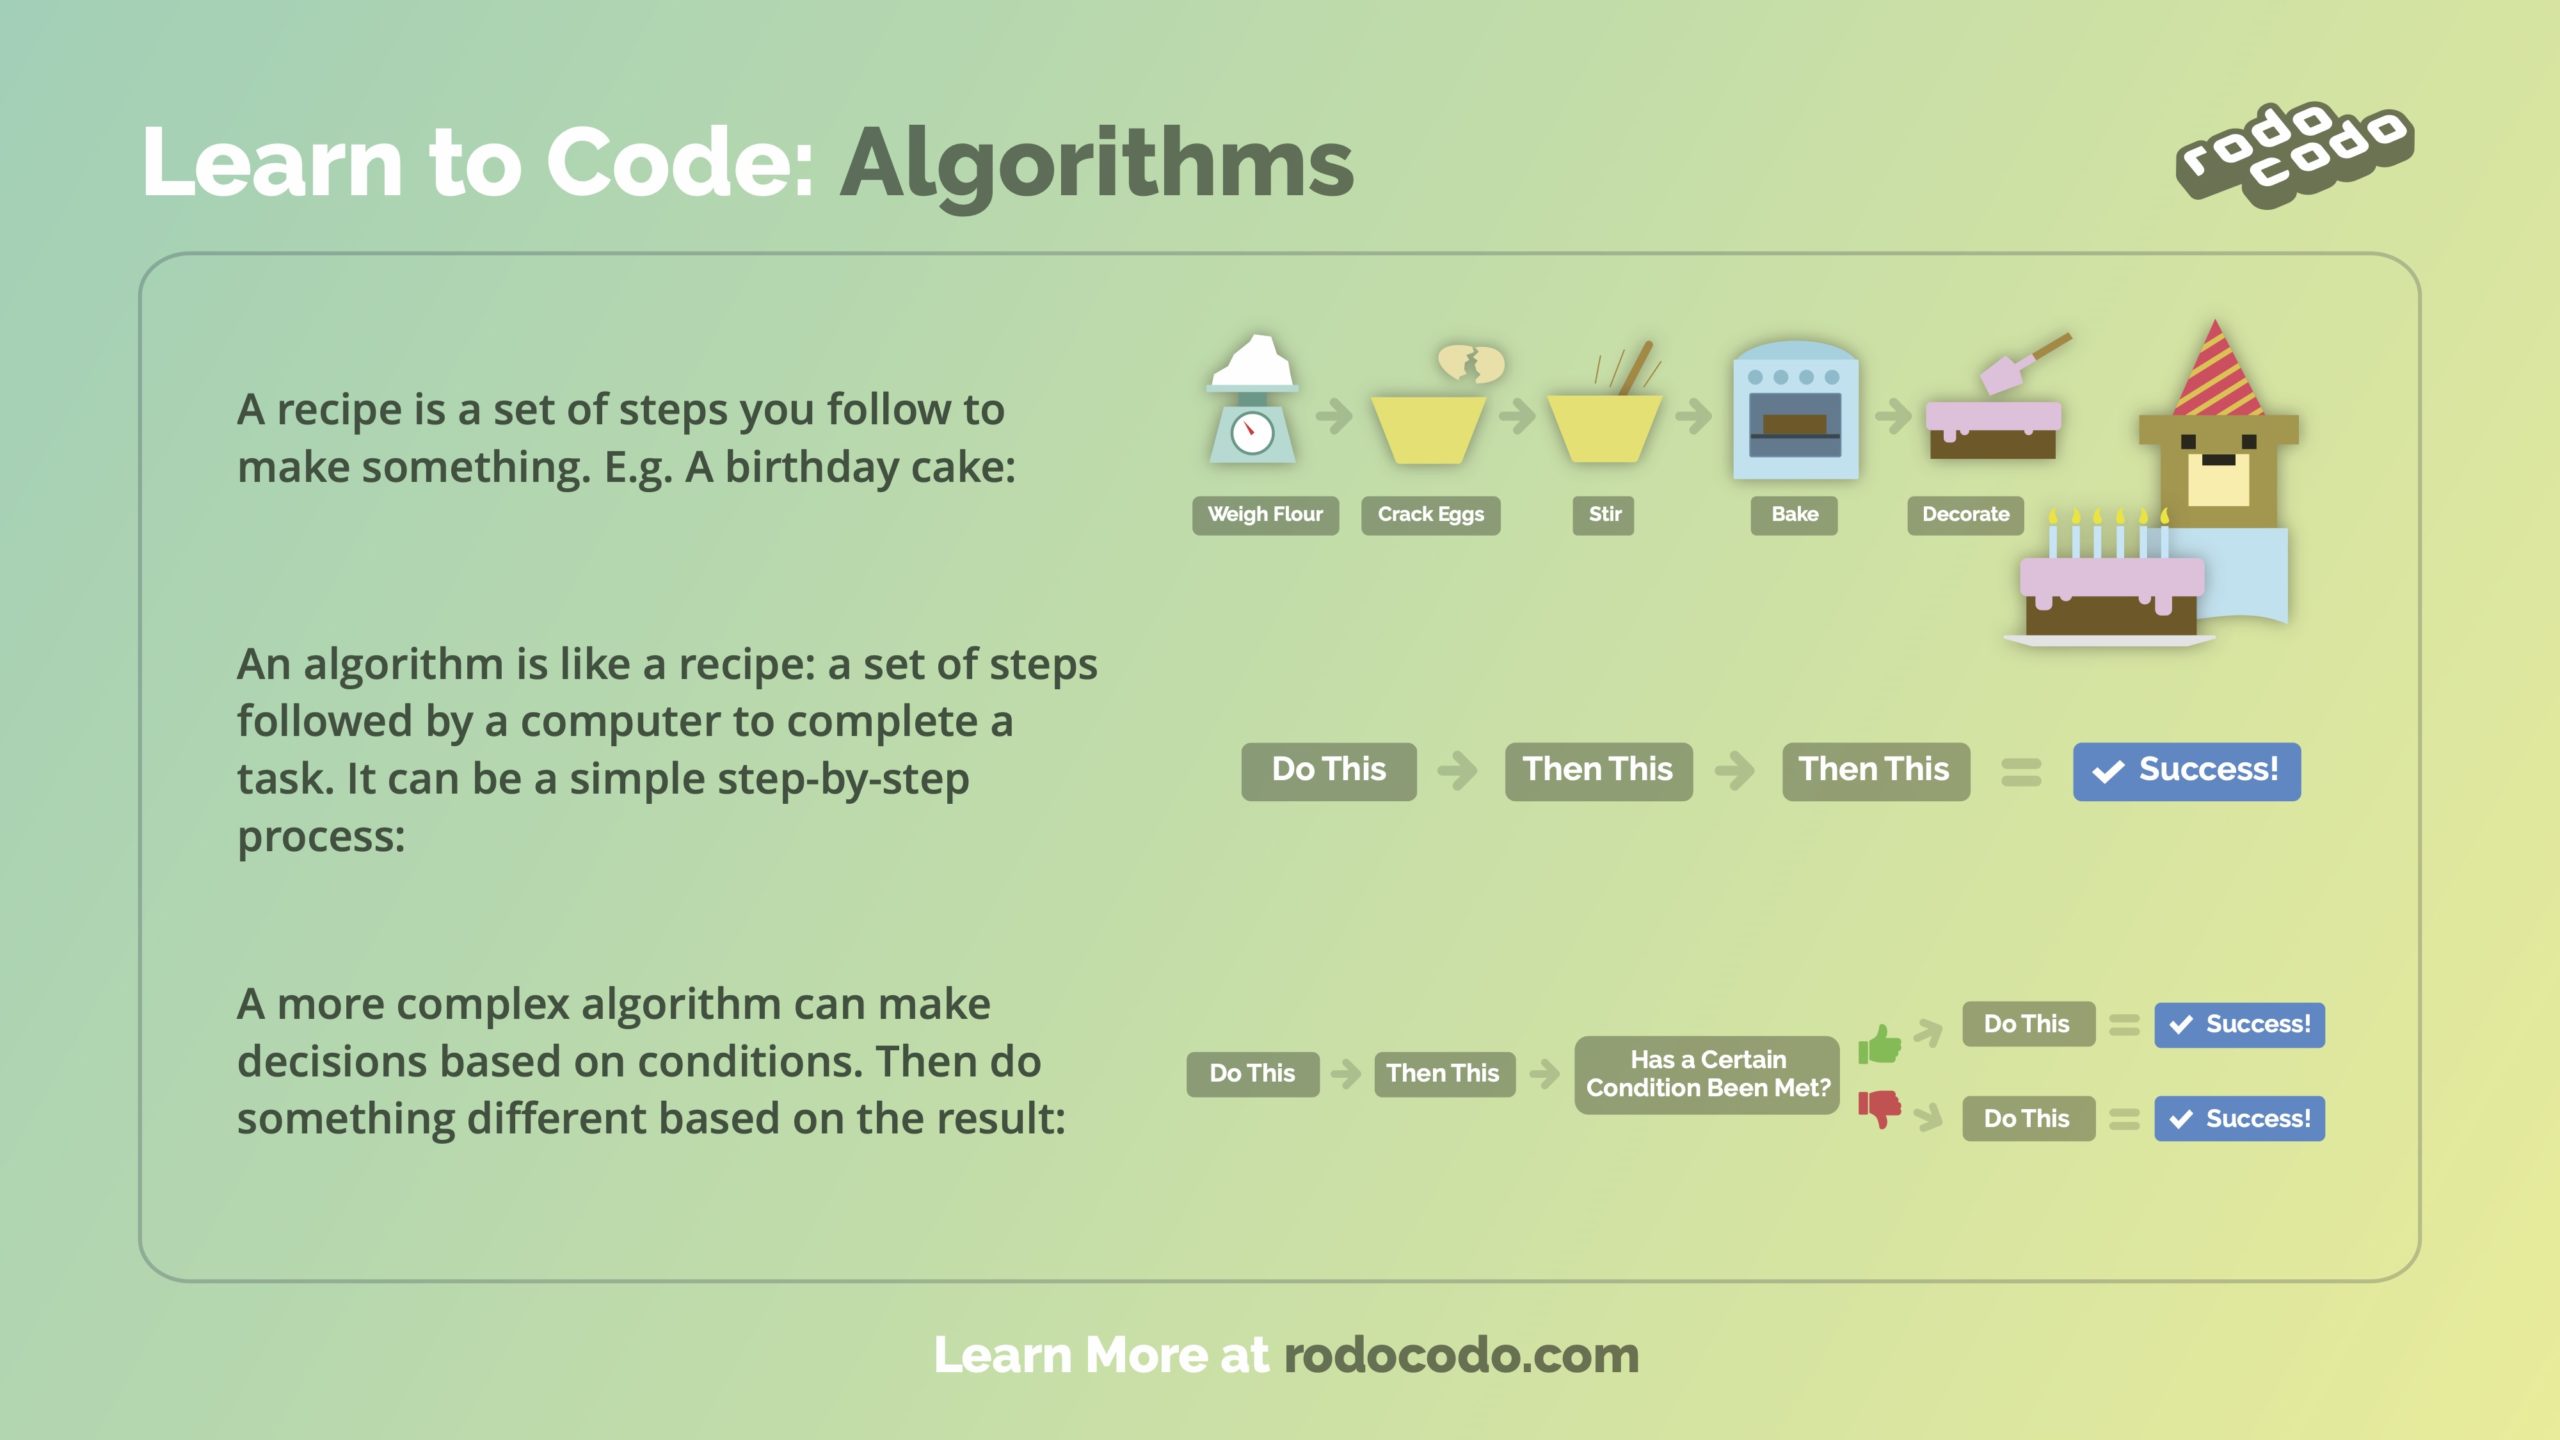 rodocodo learn to code posters 01 Algorithms scaled 1